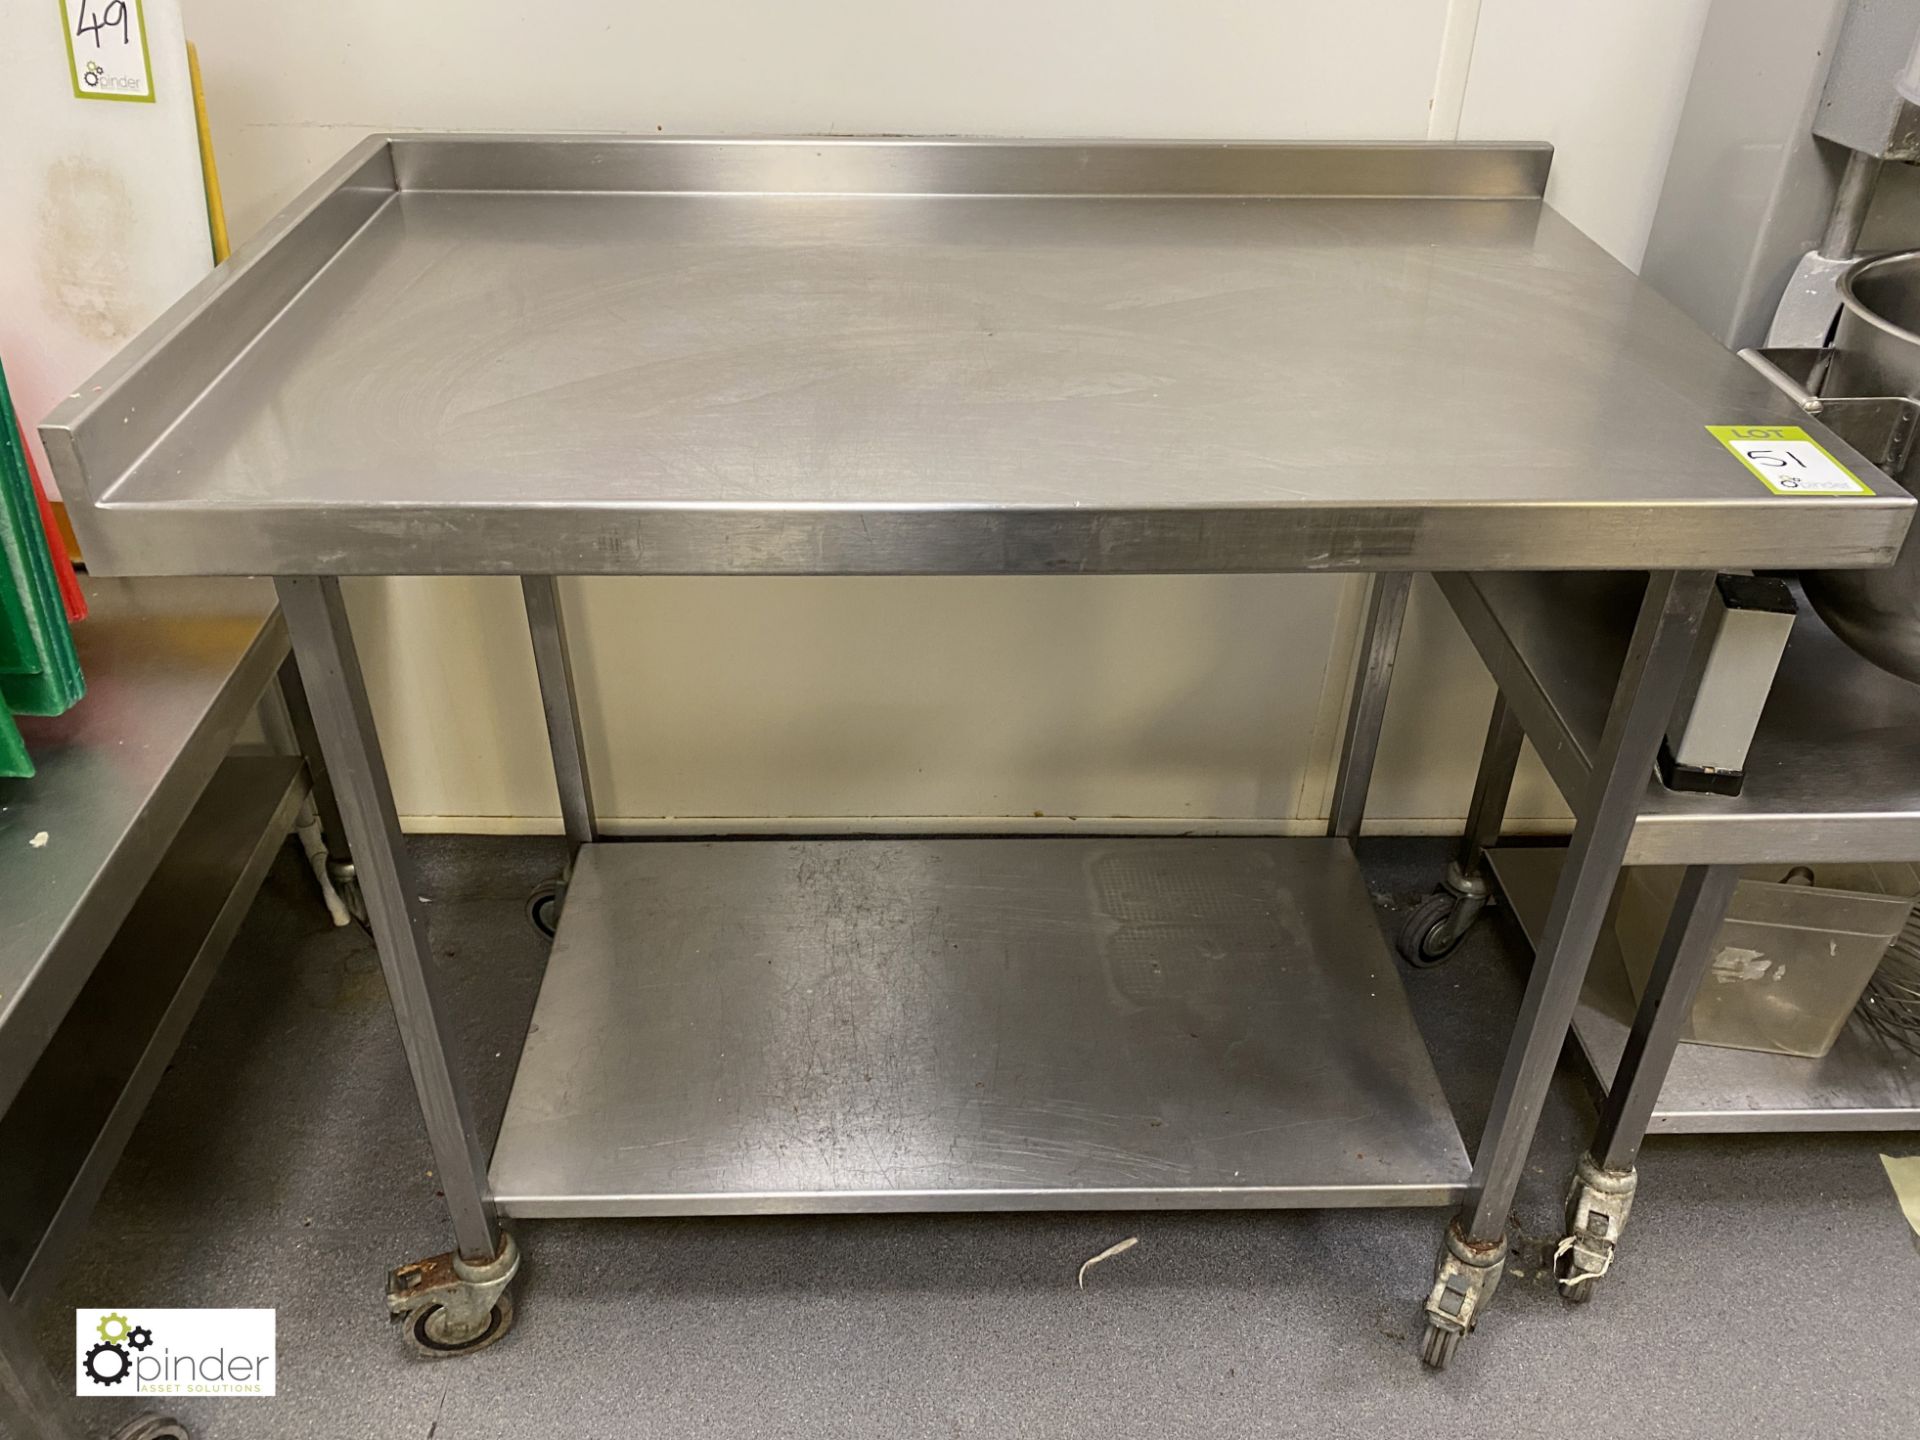 Mobile stainless steel Preparation Table, 1150mm x 700mm x 915mm, with rear and side lip and under